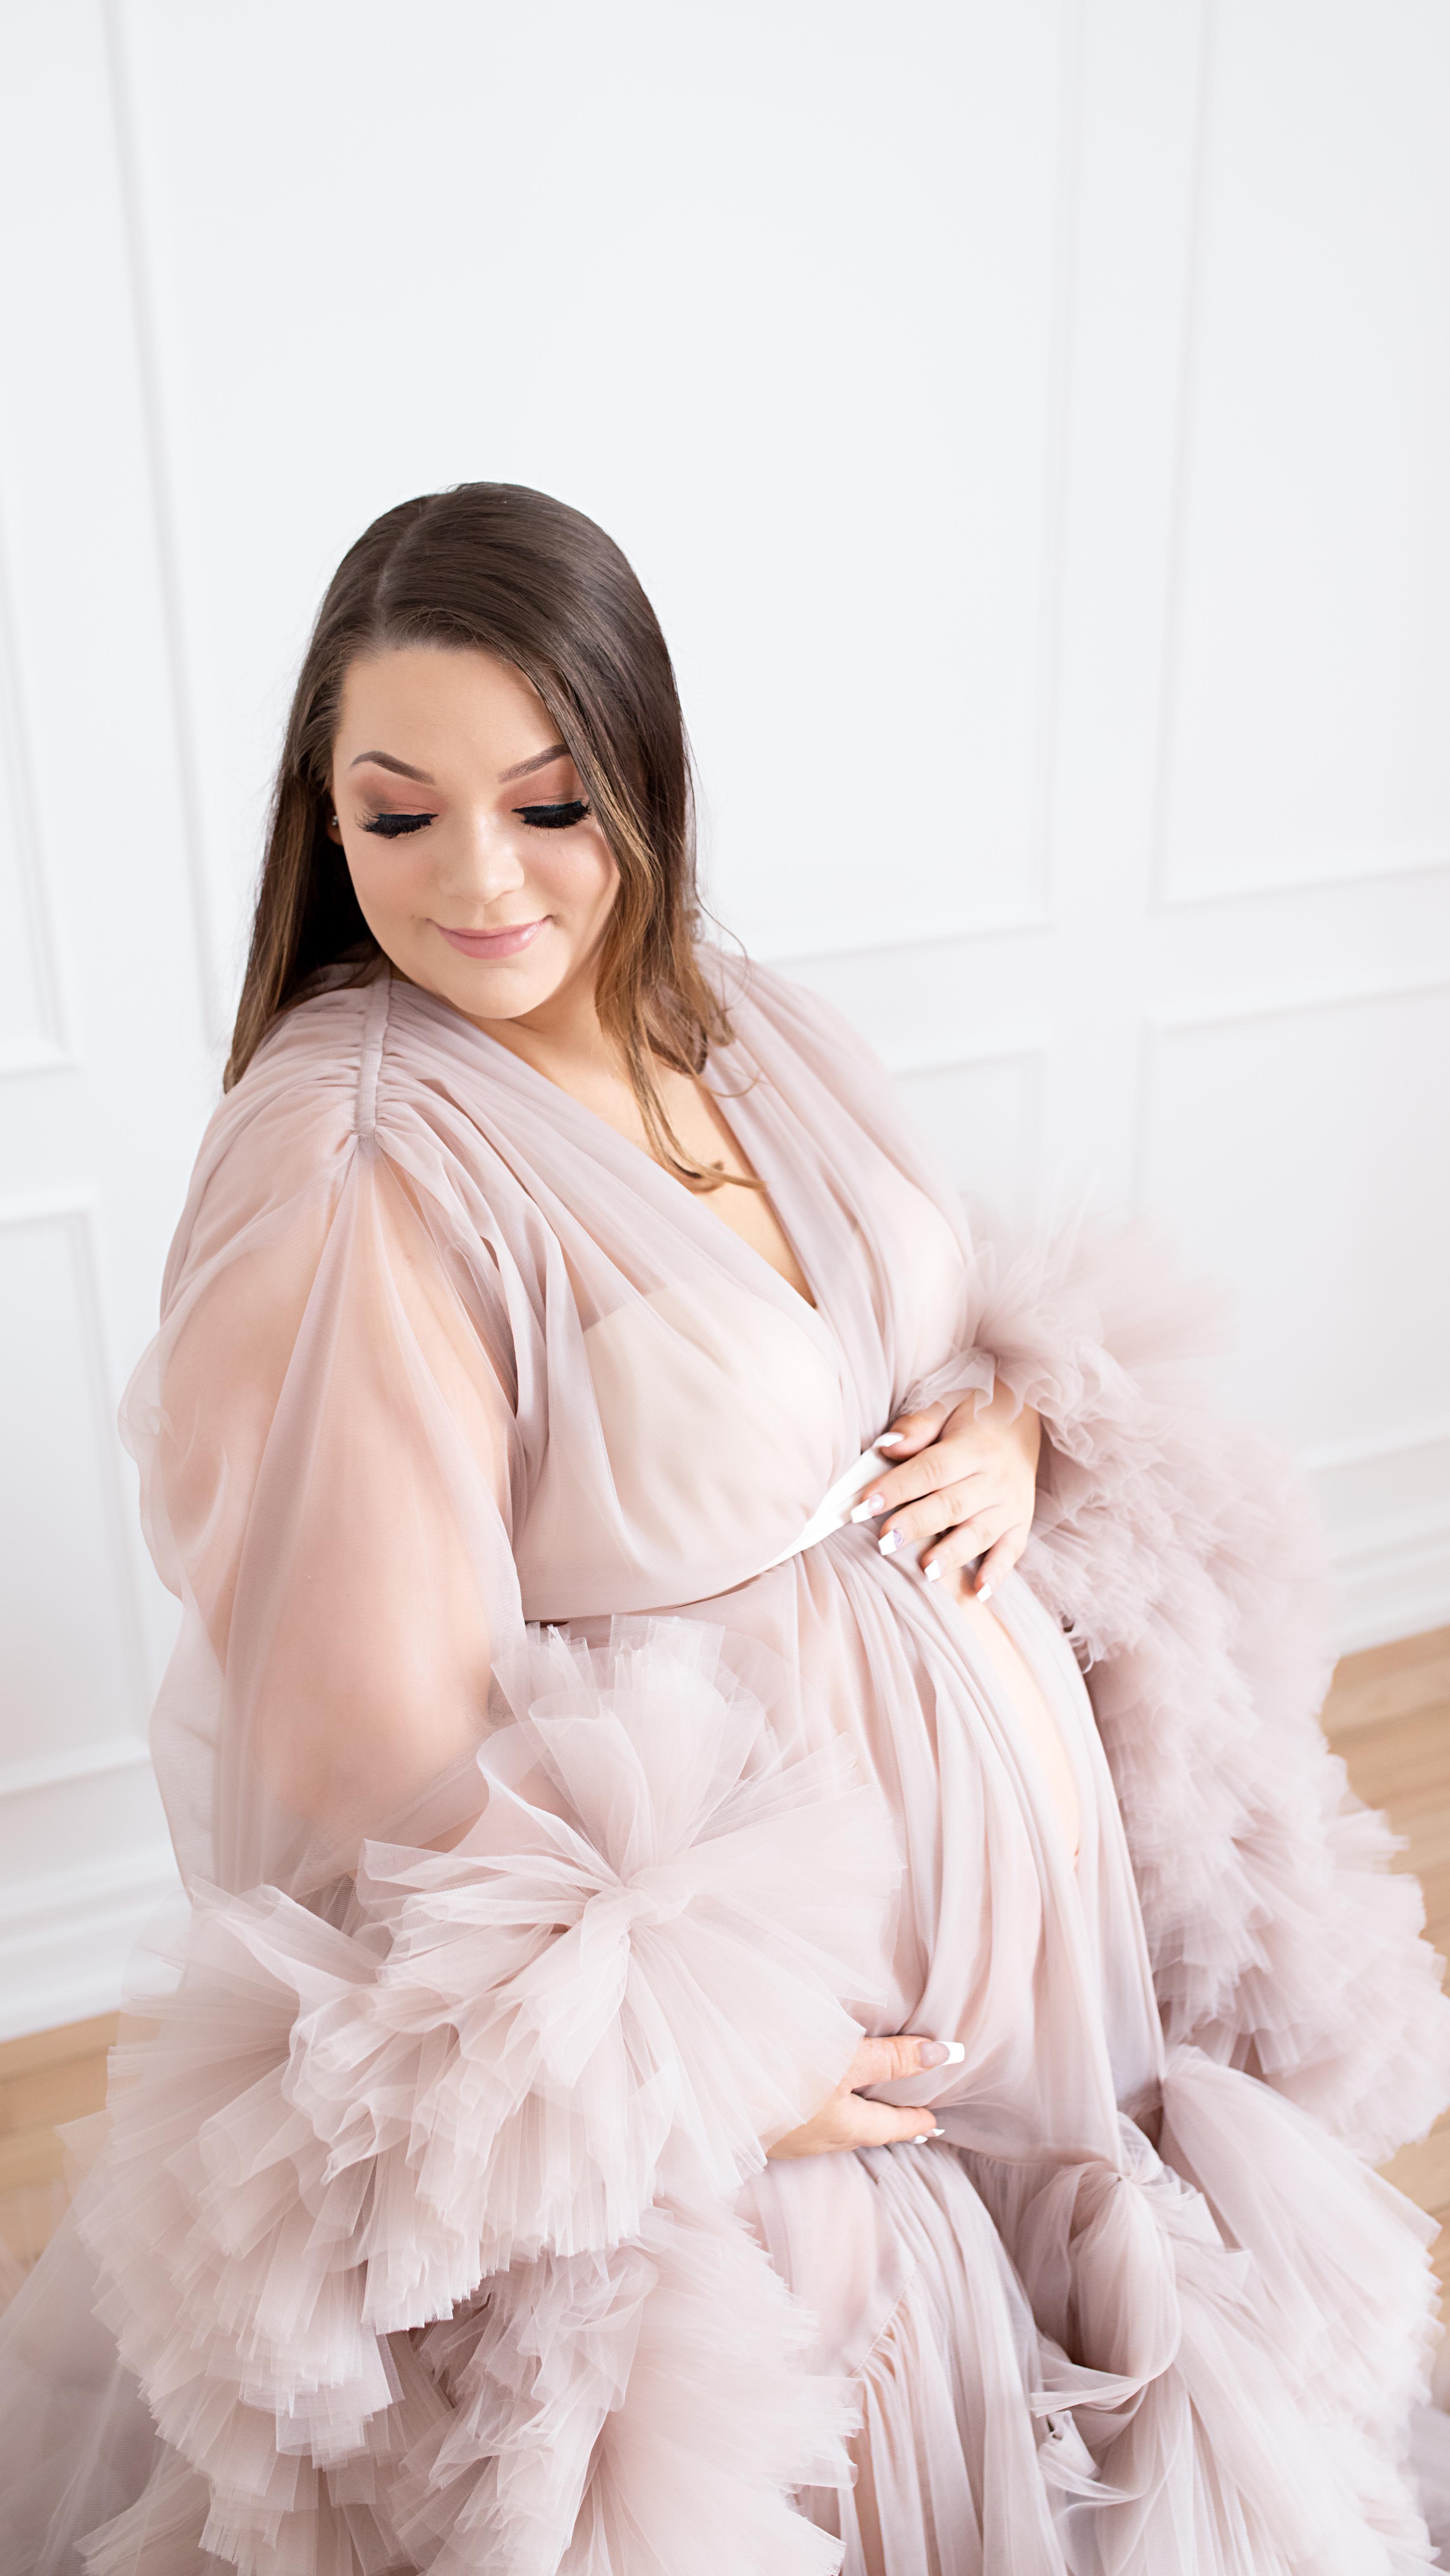 There is so much that goes on behind the scenes that we don’t realize… fanning mama’s is just one of them ;)

Can’t wait to meet this little one soon! 

#oshawanewbornphotographer
#oshawaphotographer #whitbynewbornphotographer #ajaxnewbornphotographer #bowmanvillenewbornphotographer #oshawanewbornphotography #oshawamoms #durhamregionmoms #gtanewbornphotographer #gtanewbornphotography #gtaphotographer #canadiannewbornphotographer #canadianmaternityphotographer #mama #instagram #instagrammamas #behindthescenes